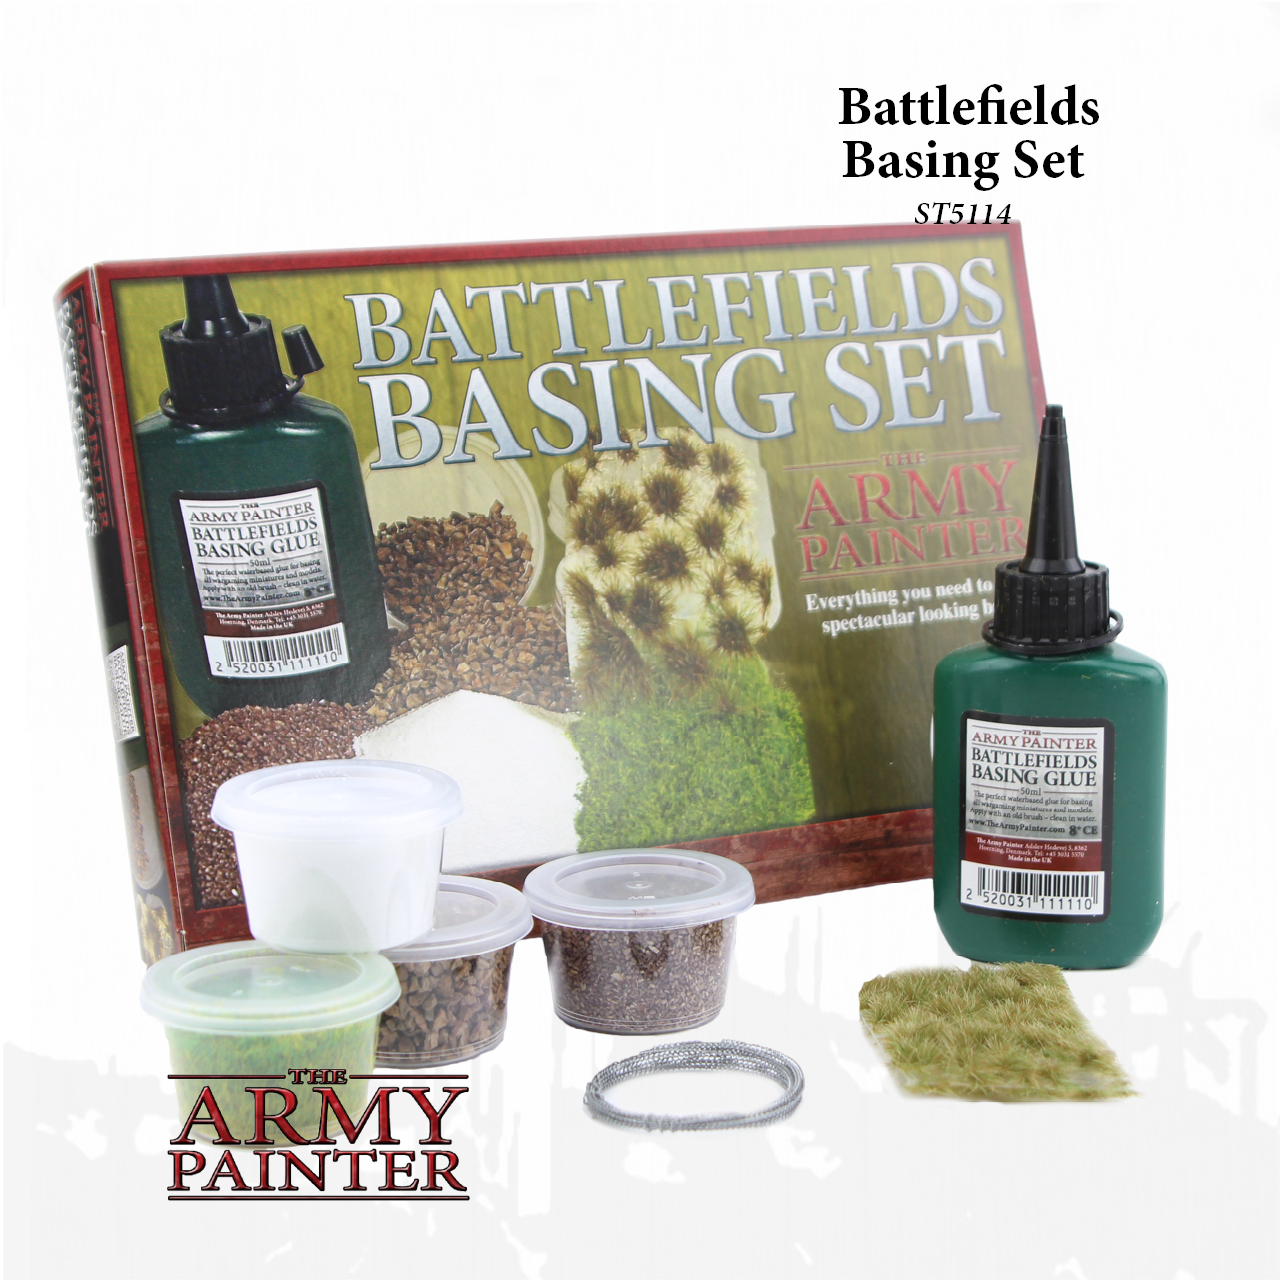 The Army Painter: Battlefield Basing Set